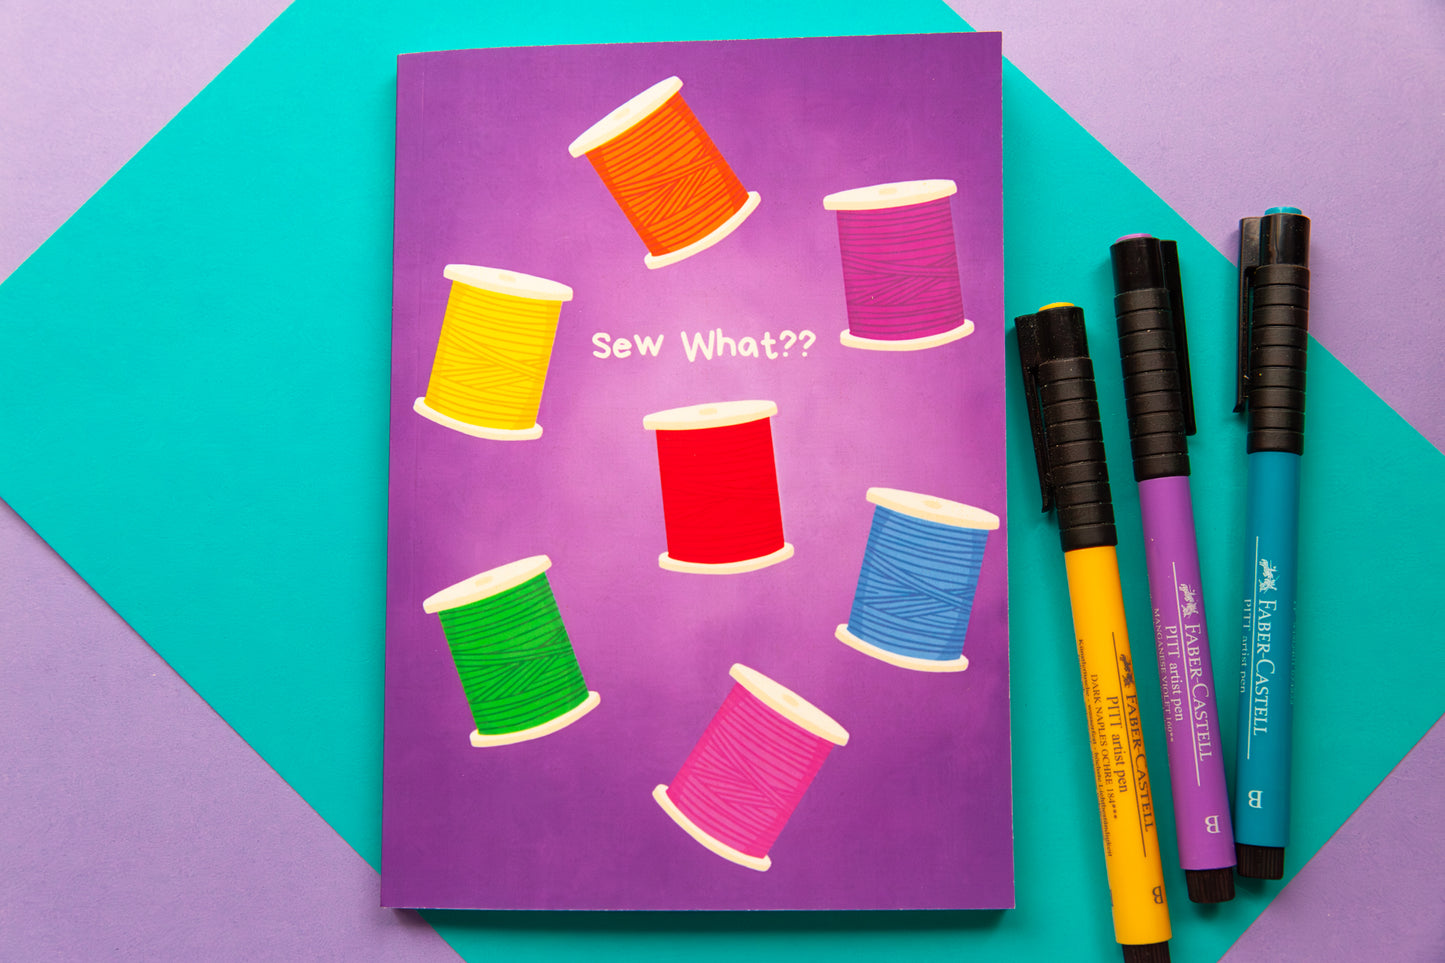 Overhead view of a purple notebook with an illustration of spools of thread in a rainbow of colours on the cover. The notebook sits on a colourful teal and purple back drop. Three markers in purple, teal  and  yellow sit next to the notebook